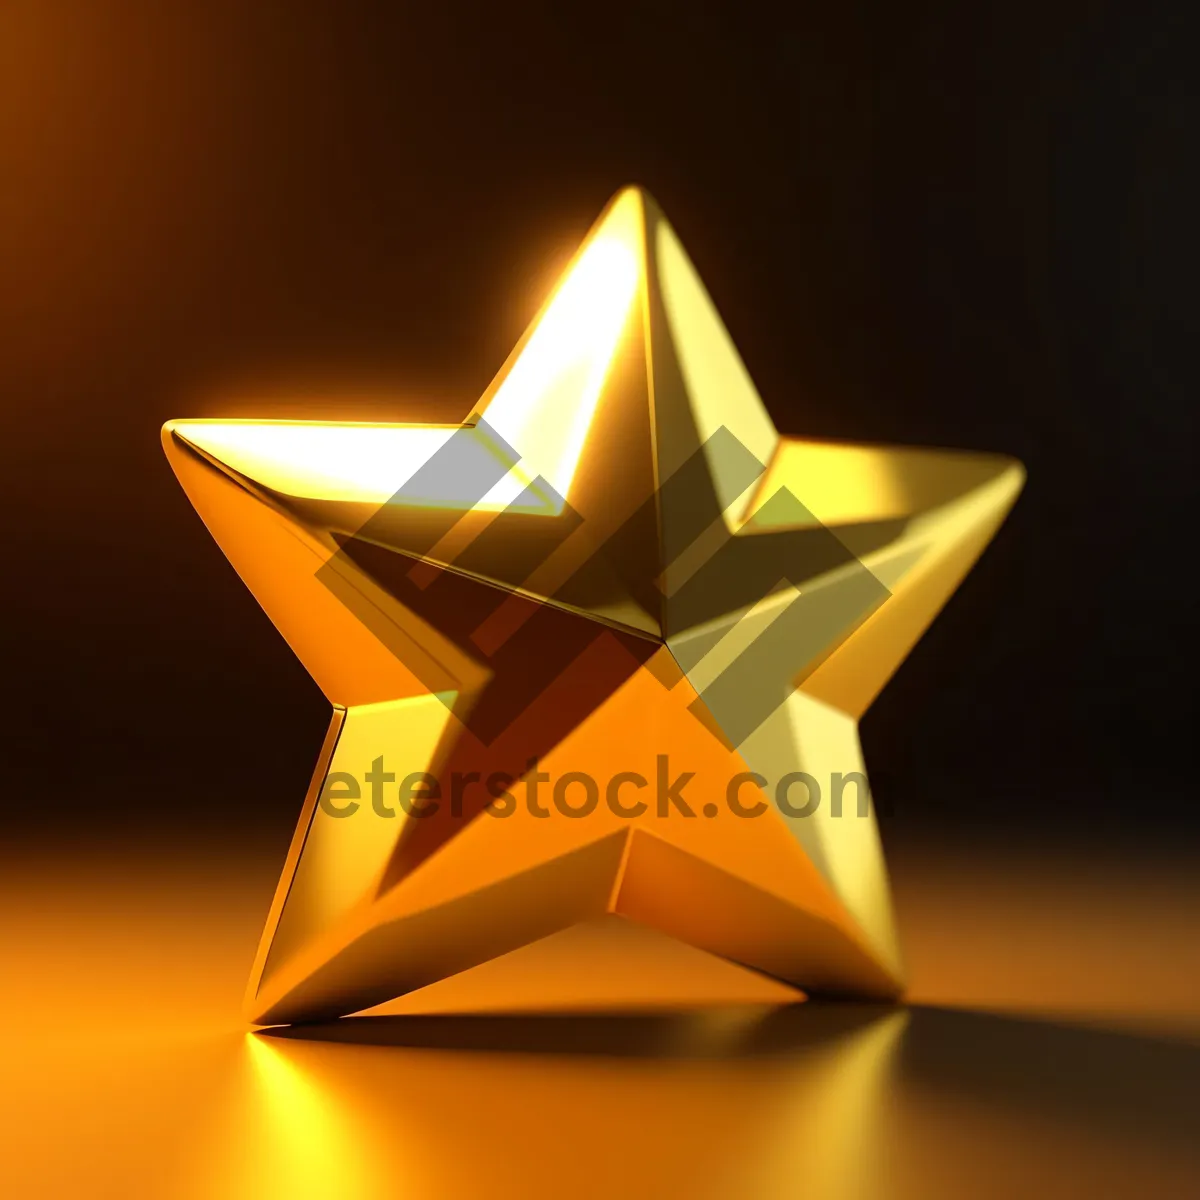 Picture of Fiery Star: A Striking Symbol of Design